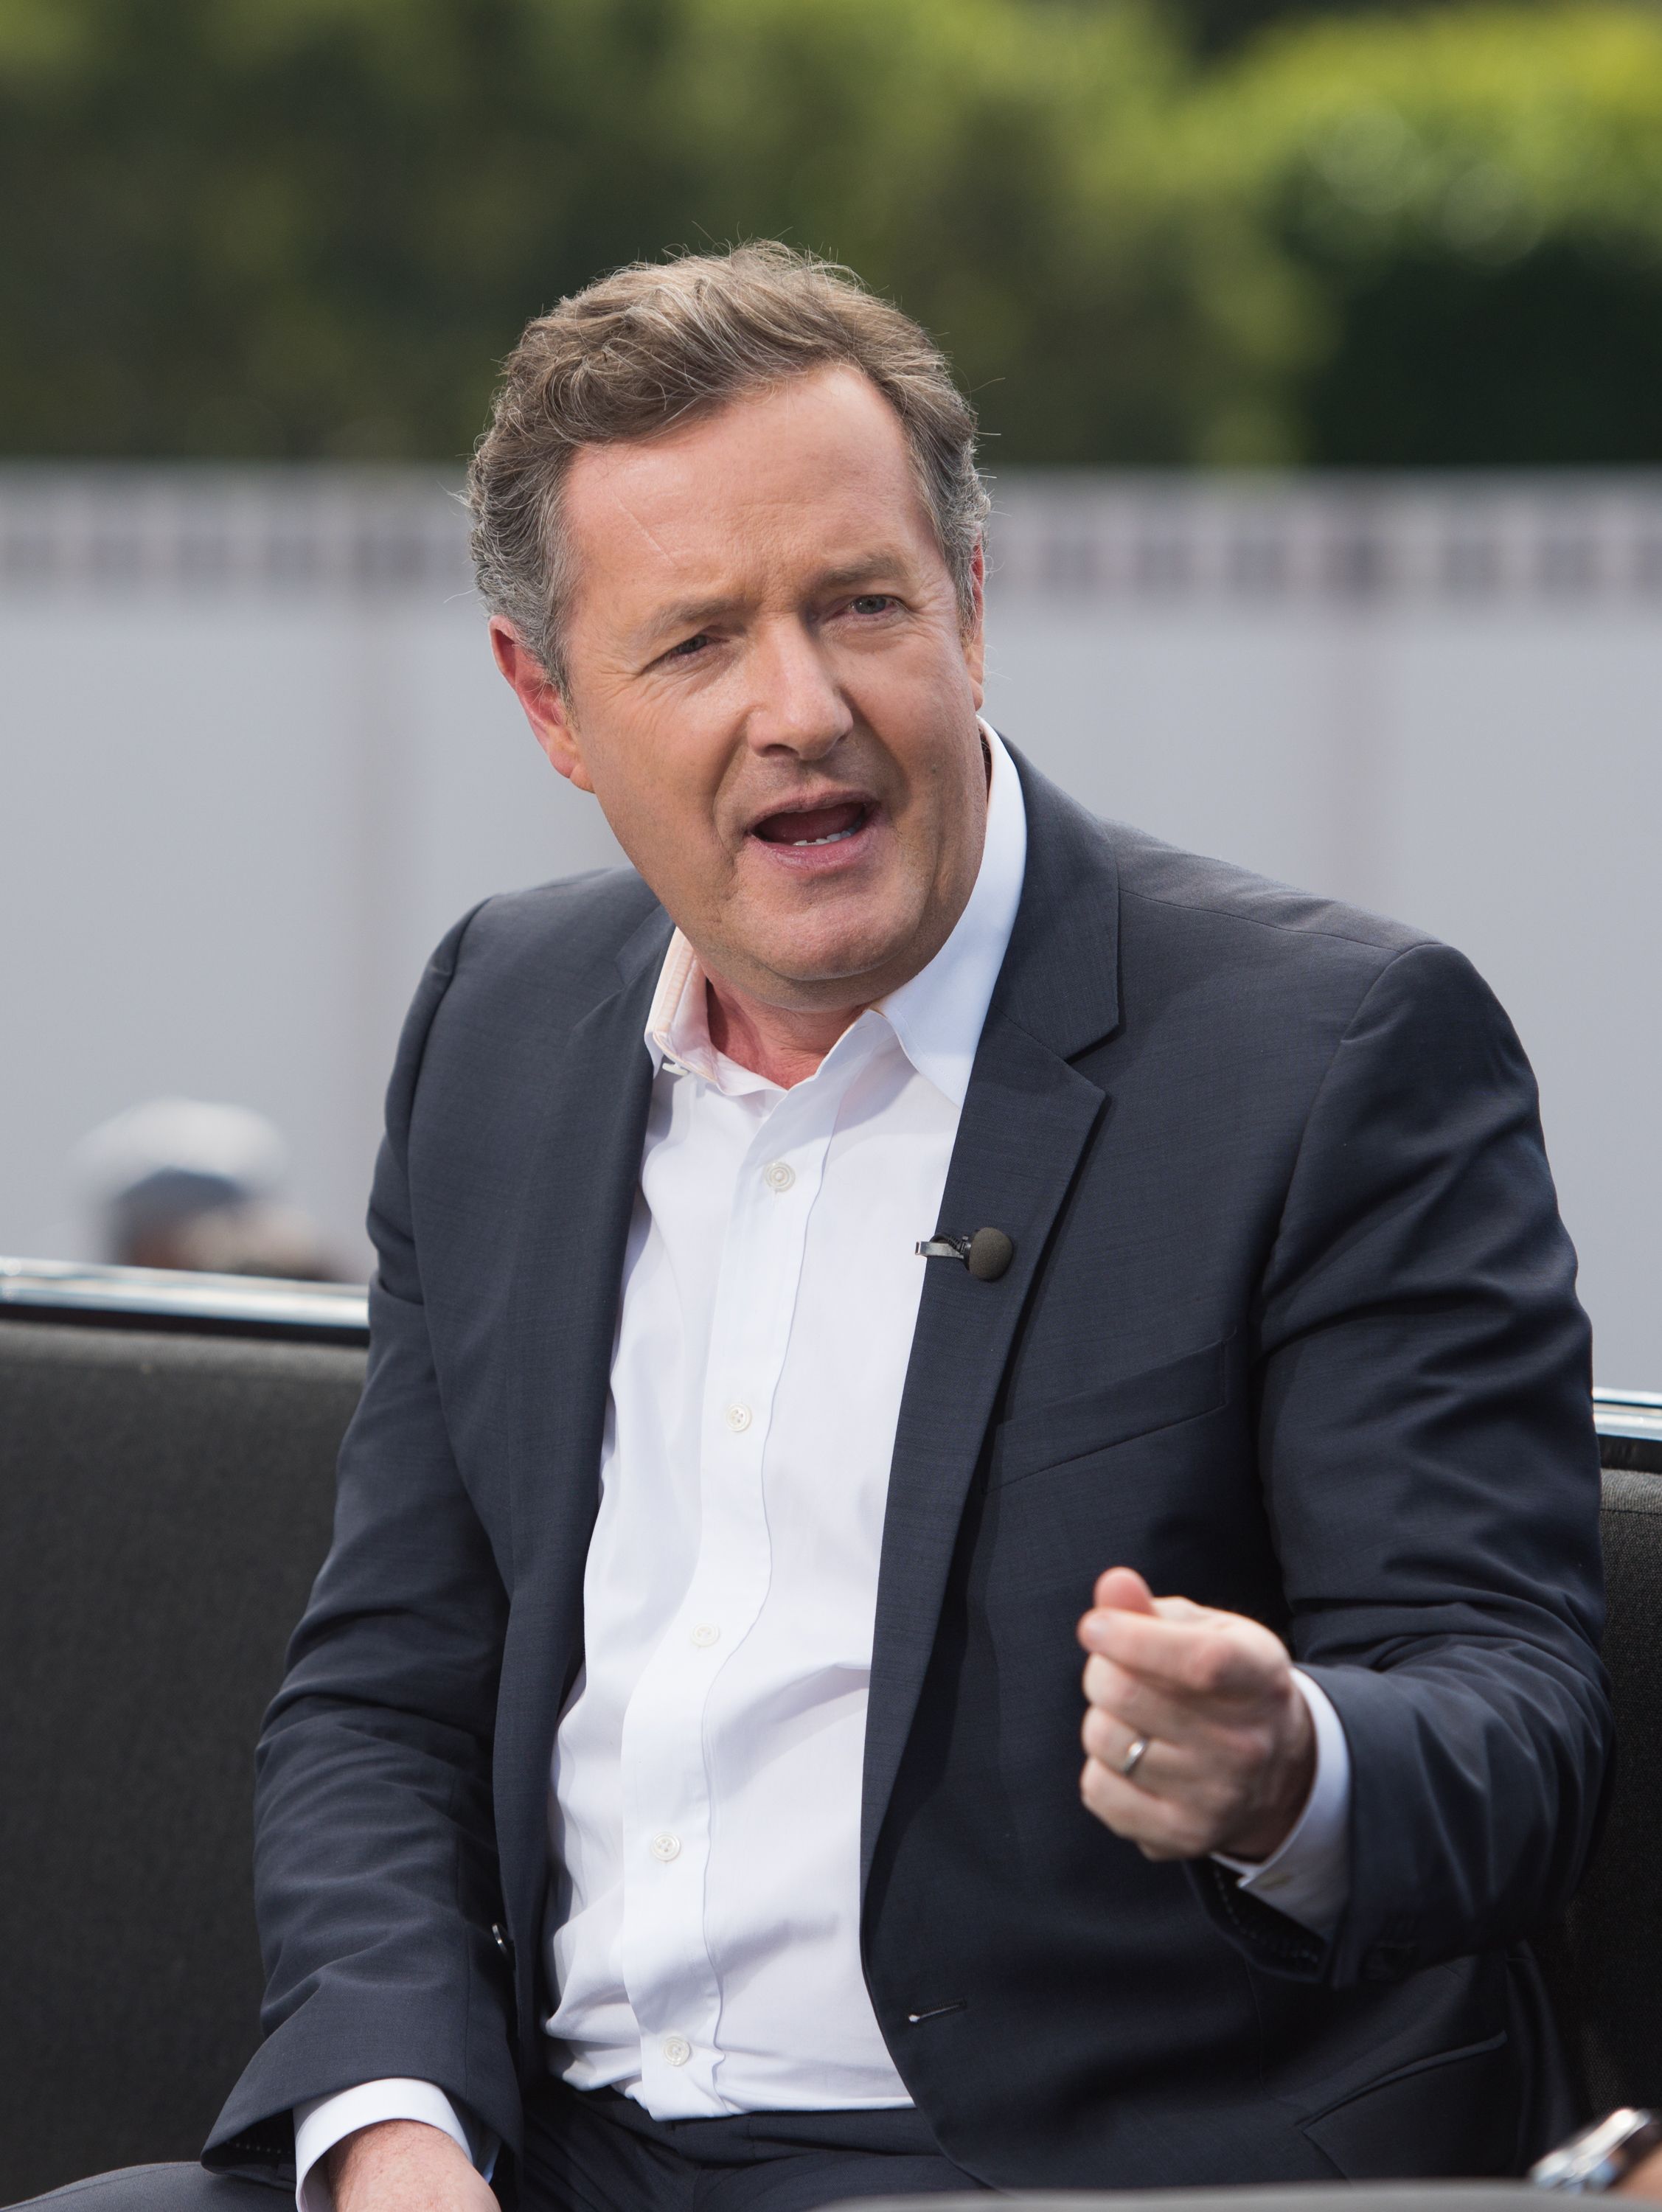 Piers Morgan visits "Extra" at Universal Studios Hollywood on February 11, 2016, in Universal City, California | Photo:Getty Images